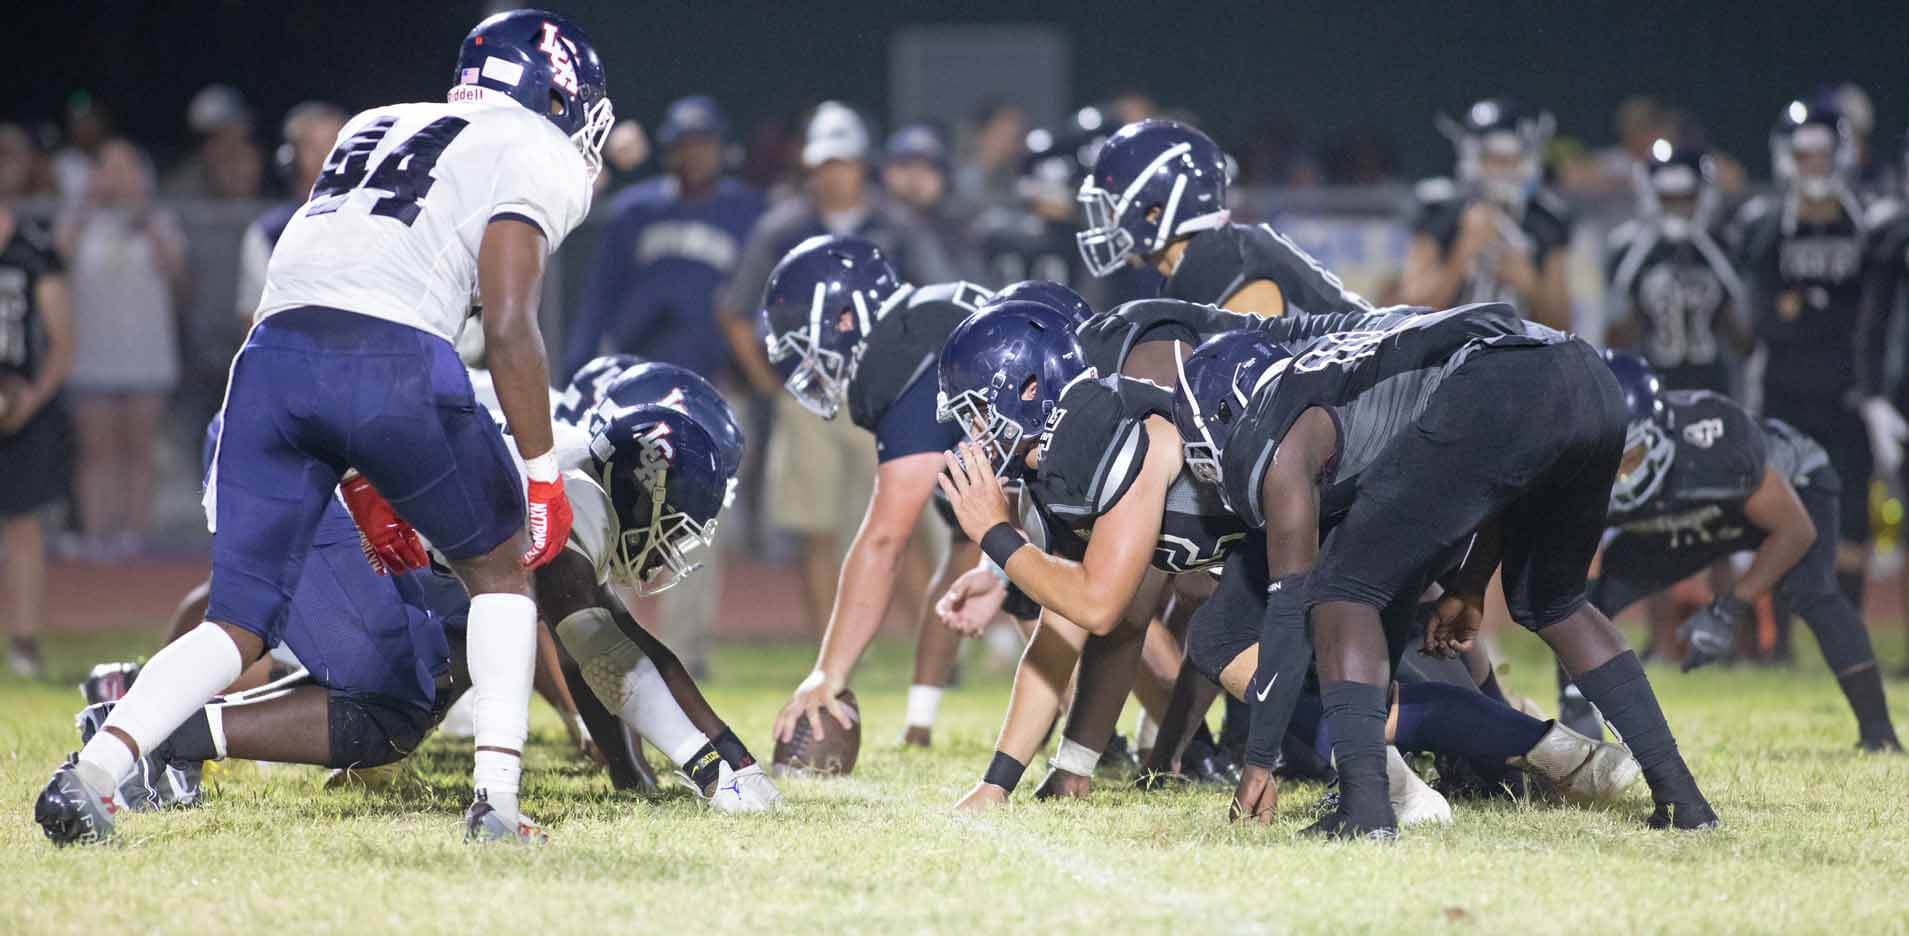 LCA Rebounds After Ruston Loss With 49-28 Victory Over Avoyelles